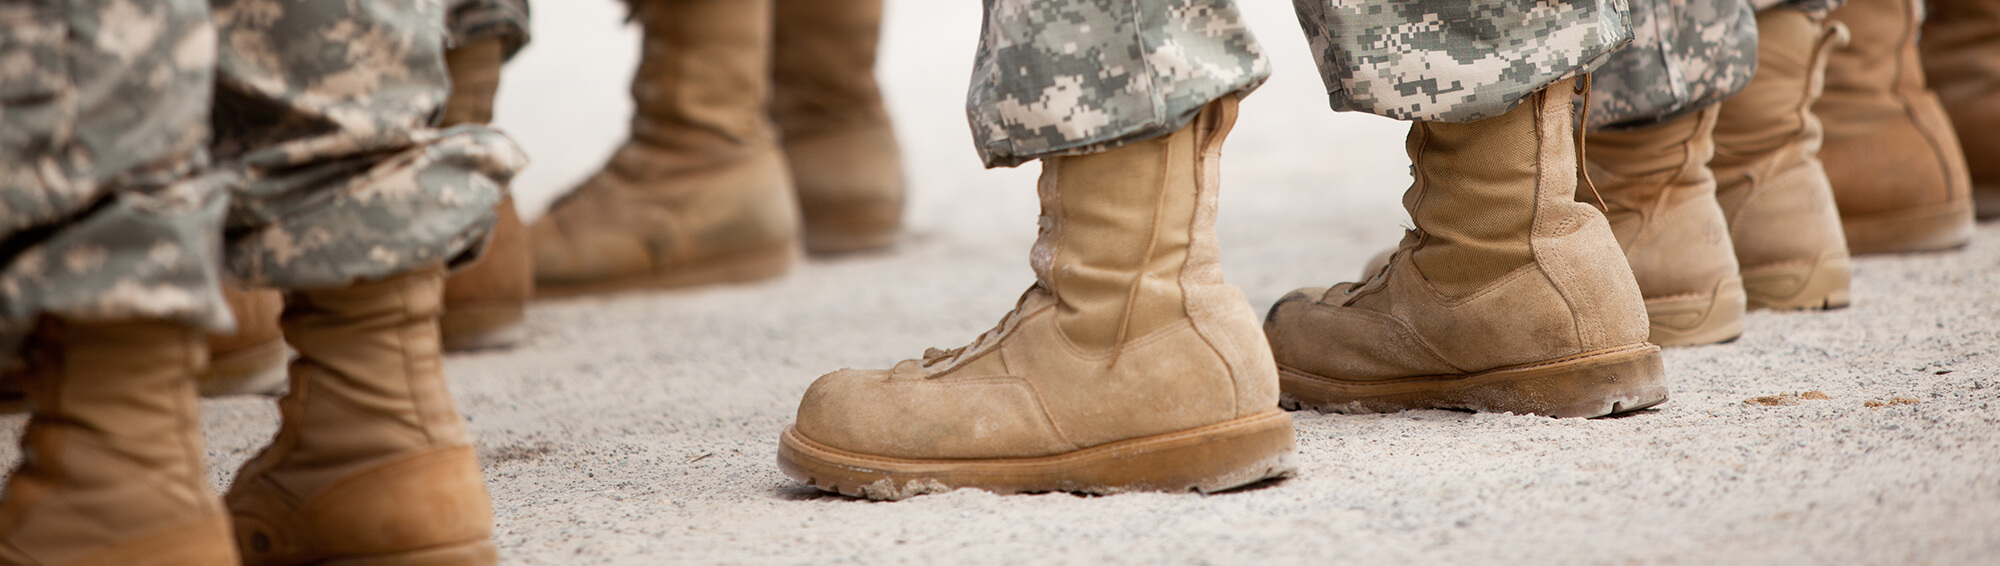 Let Us Help With Your Veterans Disability Benefits Claim